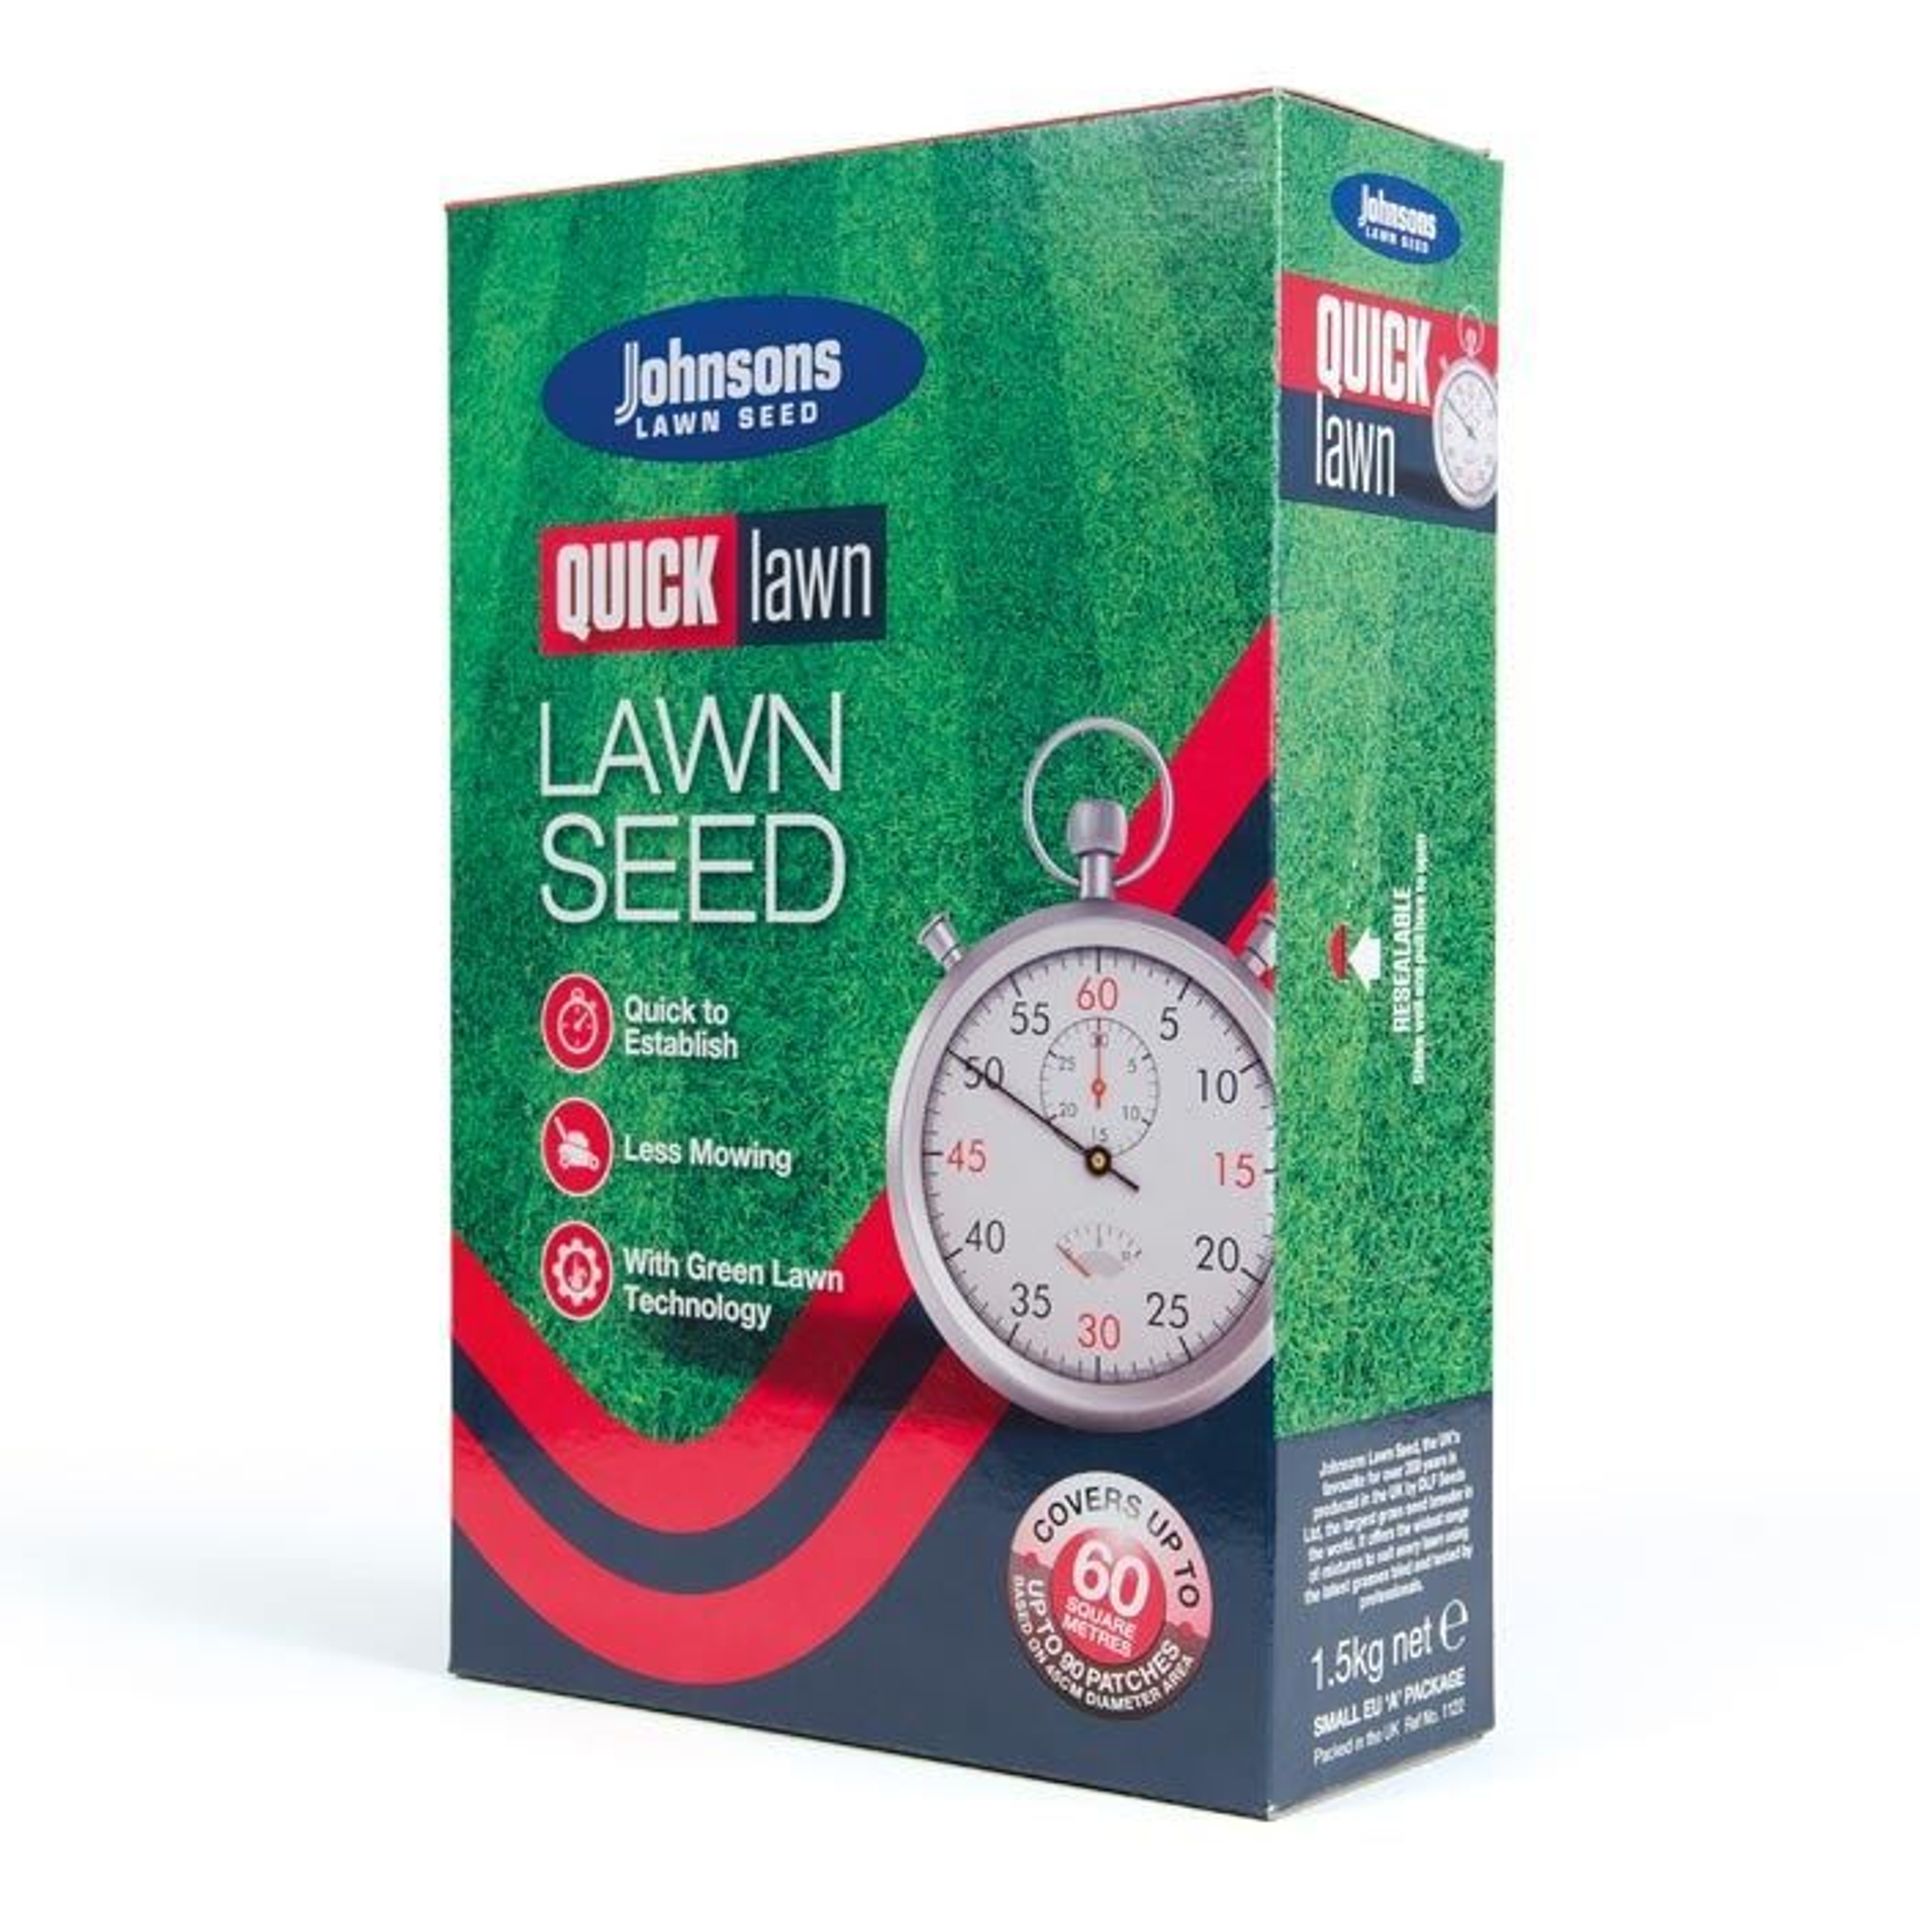 Johnsons Quick Lawn Seed